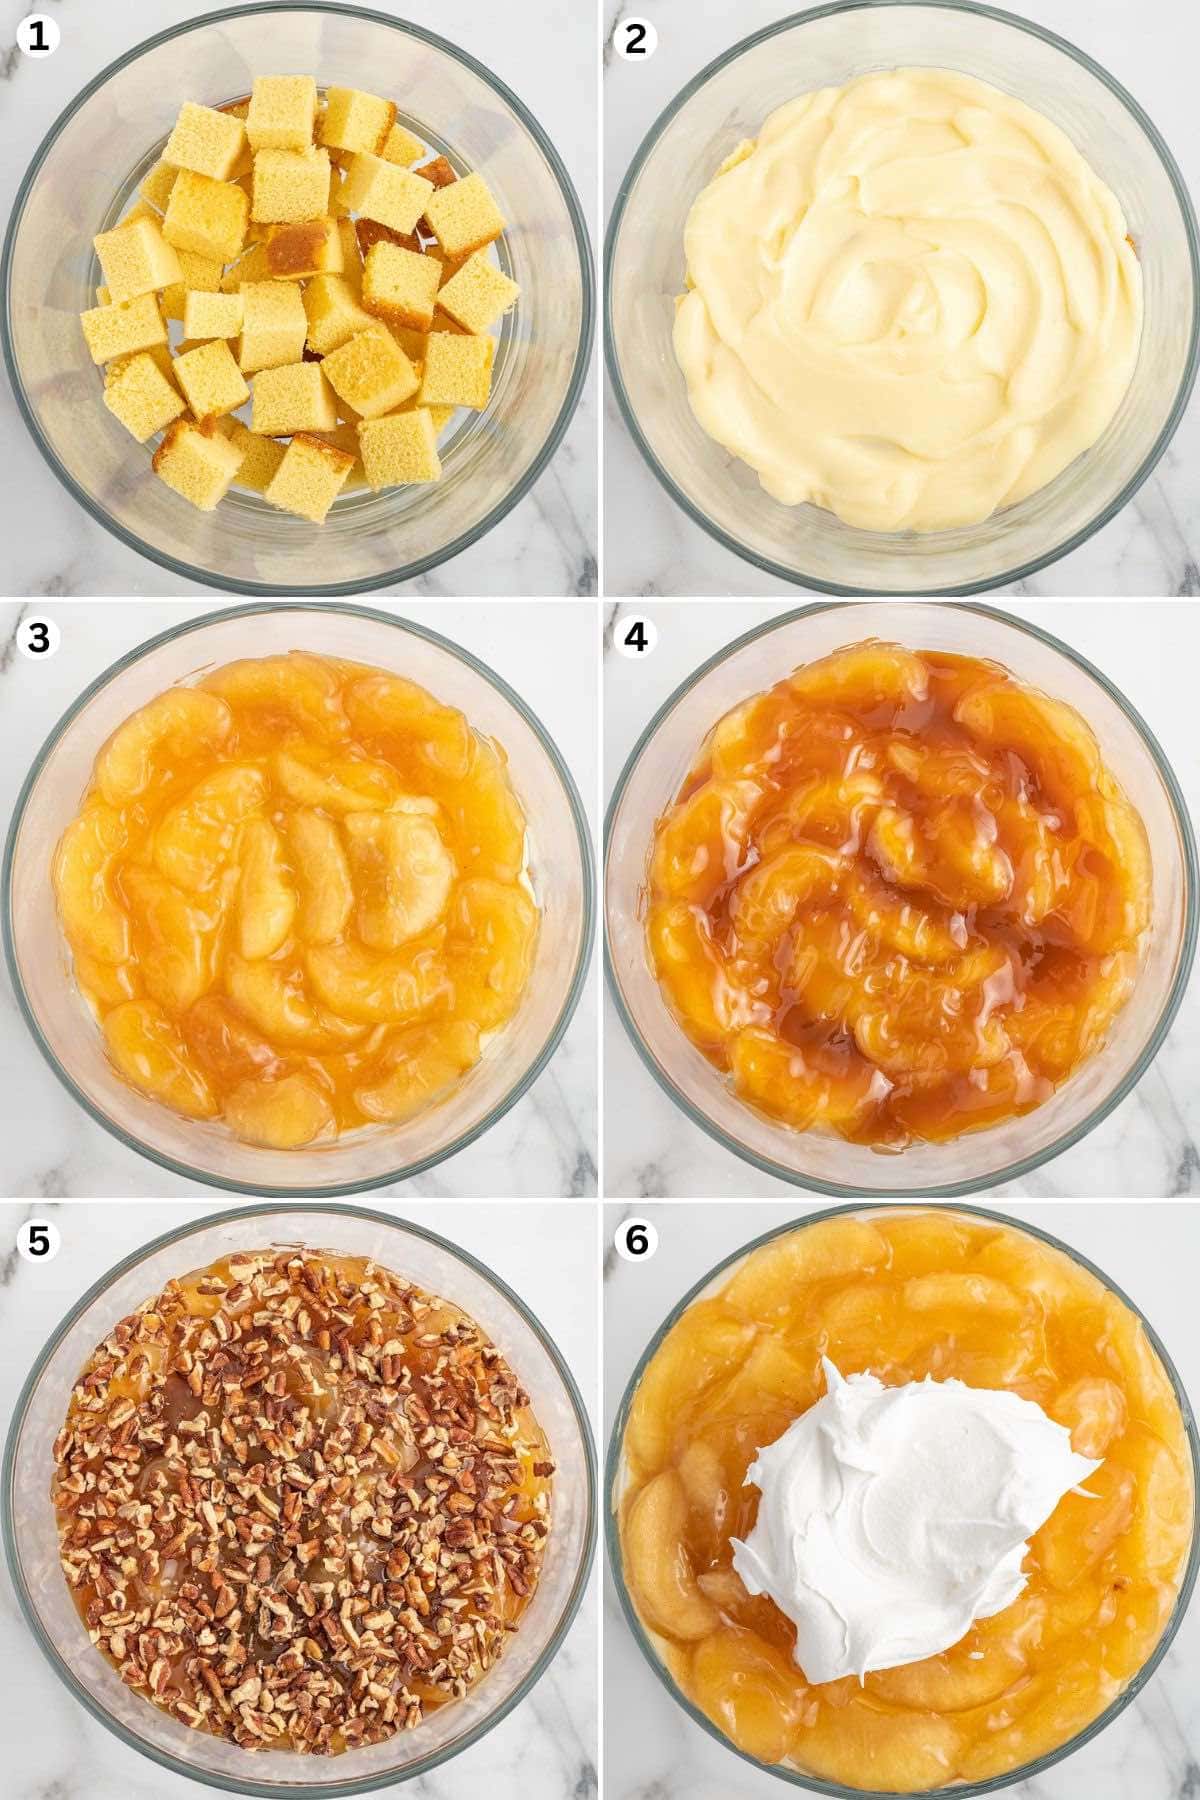 Place pound cakes in a bowl. Add pudding mixture. Add apple pie filling on top of the pudding mixture. Drizzle with caramel topping. Sprinkle chopped pecans. Repeat and add whipped topping on top. 